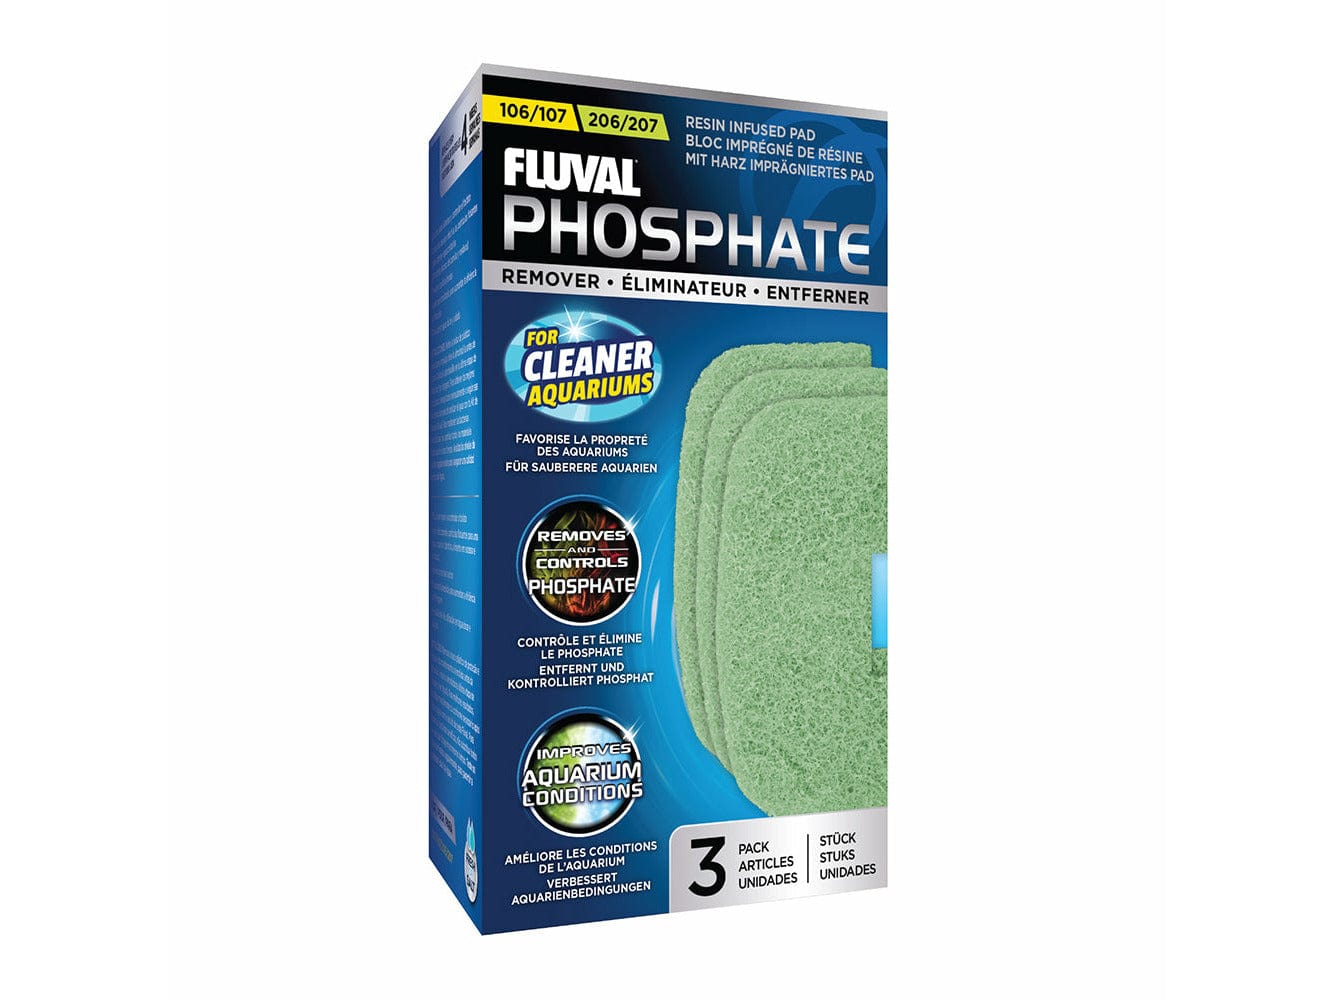 Fluval 107/207 Phosphate Remover